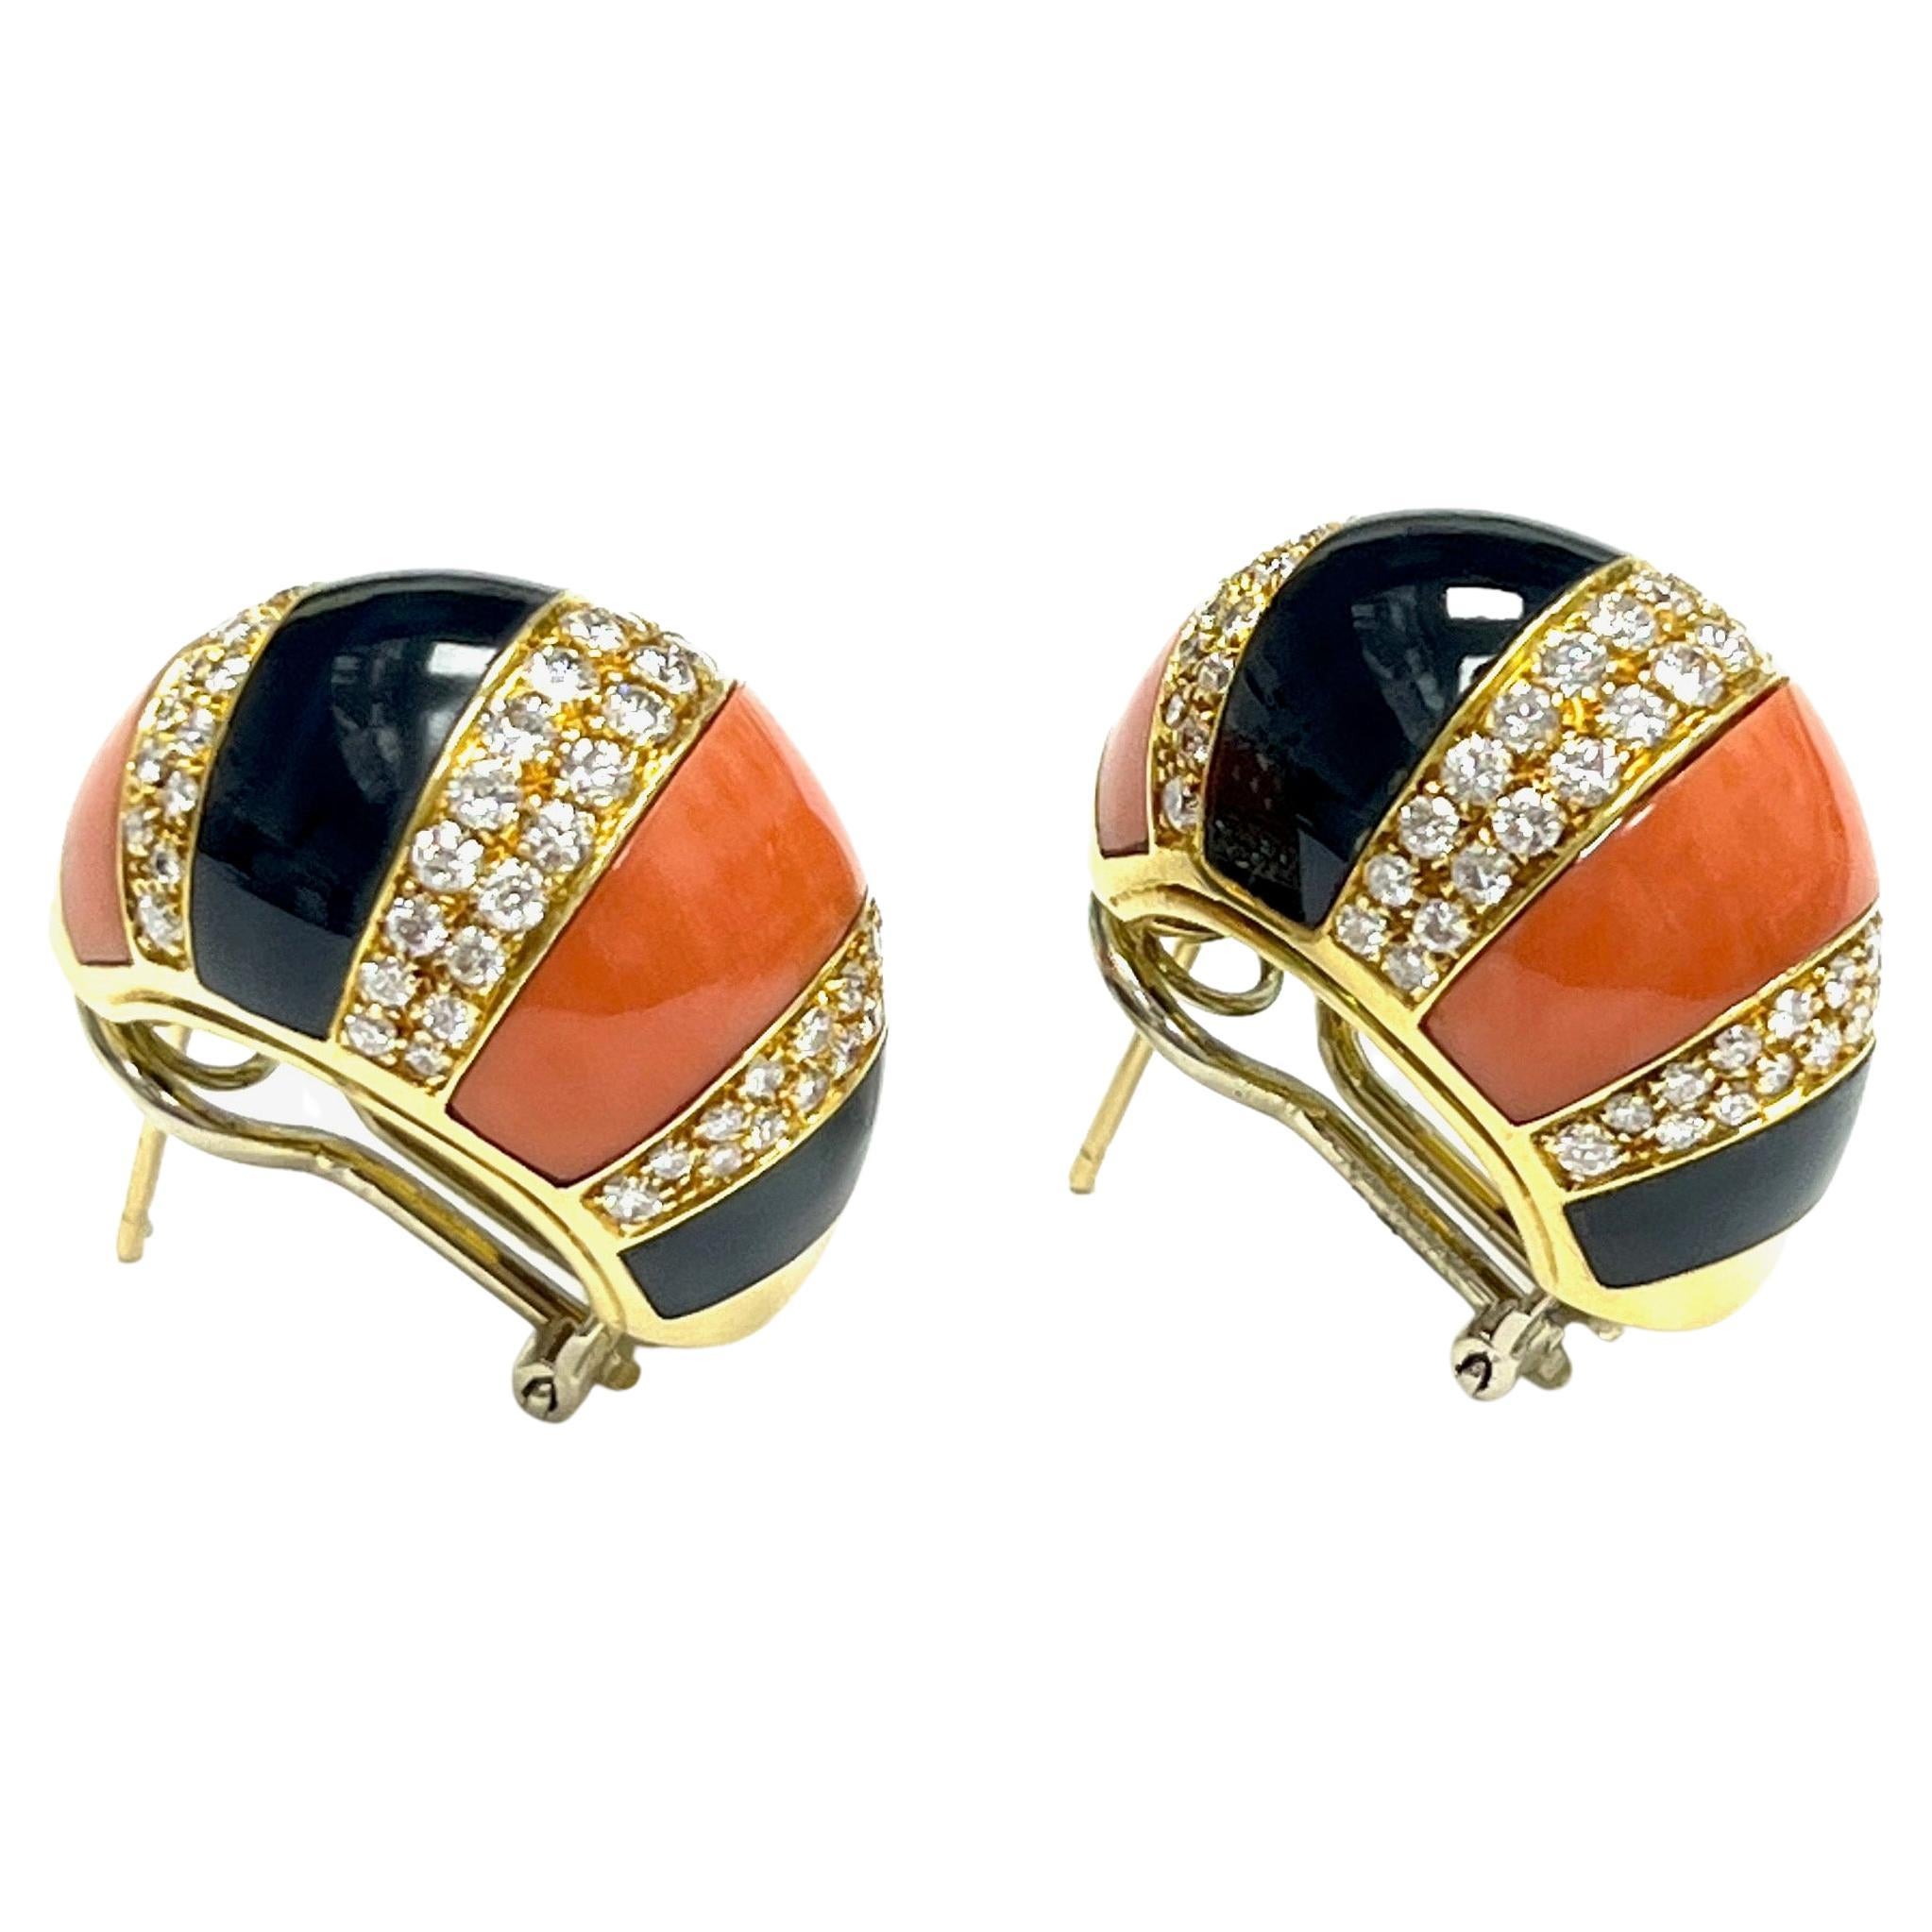 Fred Paris Coral Black Onyx Diamond Gold Earrings In Excellent Condition For Sale In New York, NY